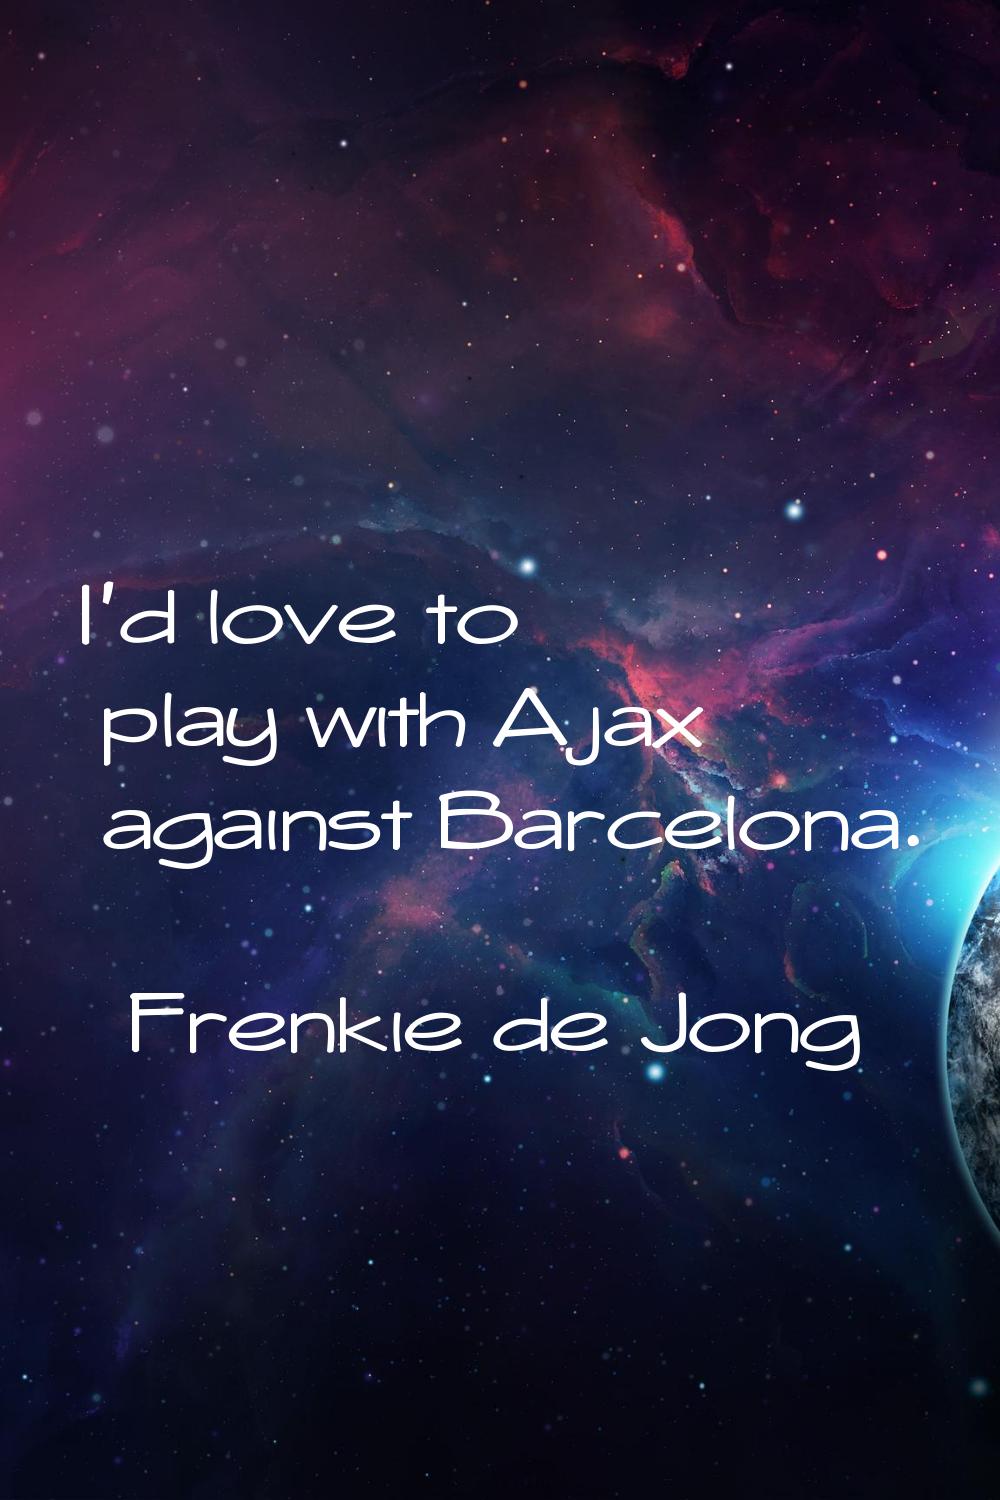 I'd love to play with Ajax against Barcelona.